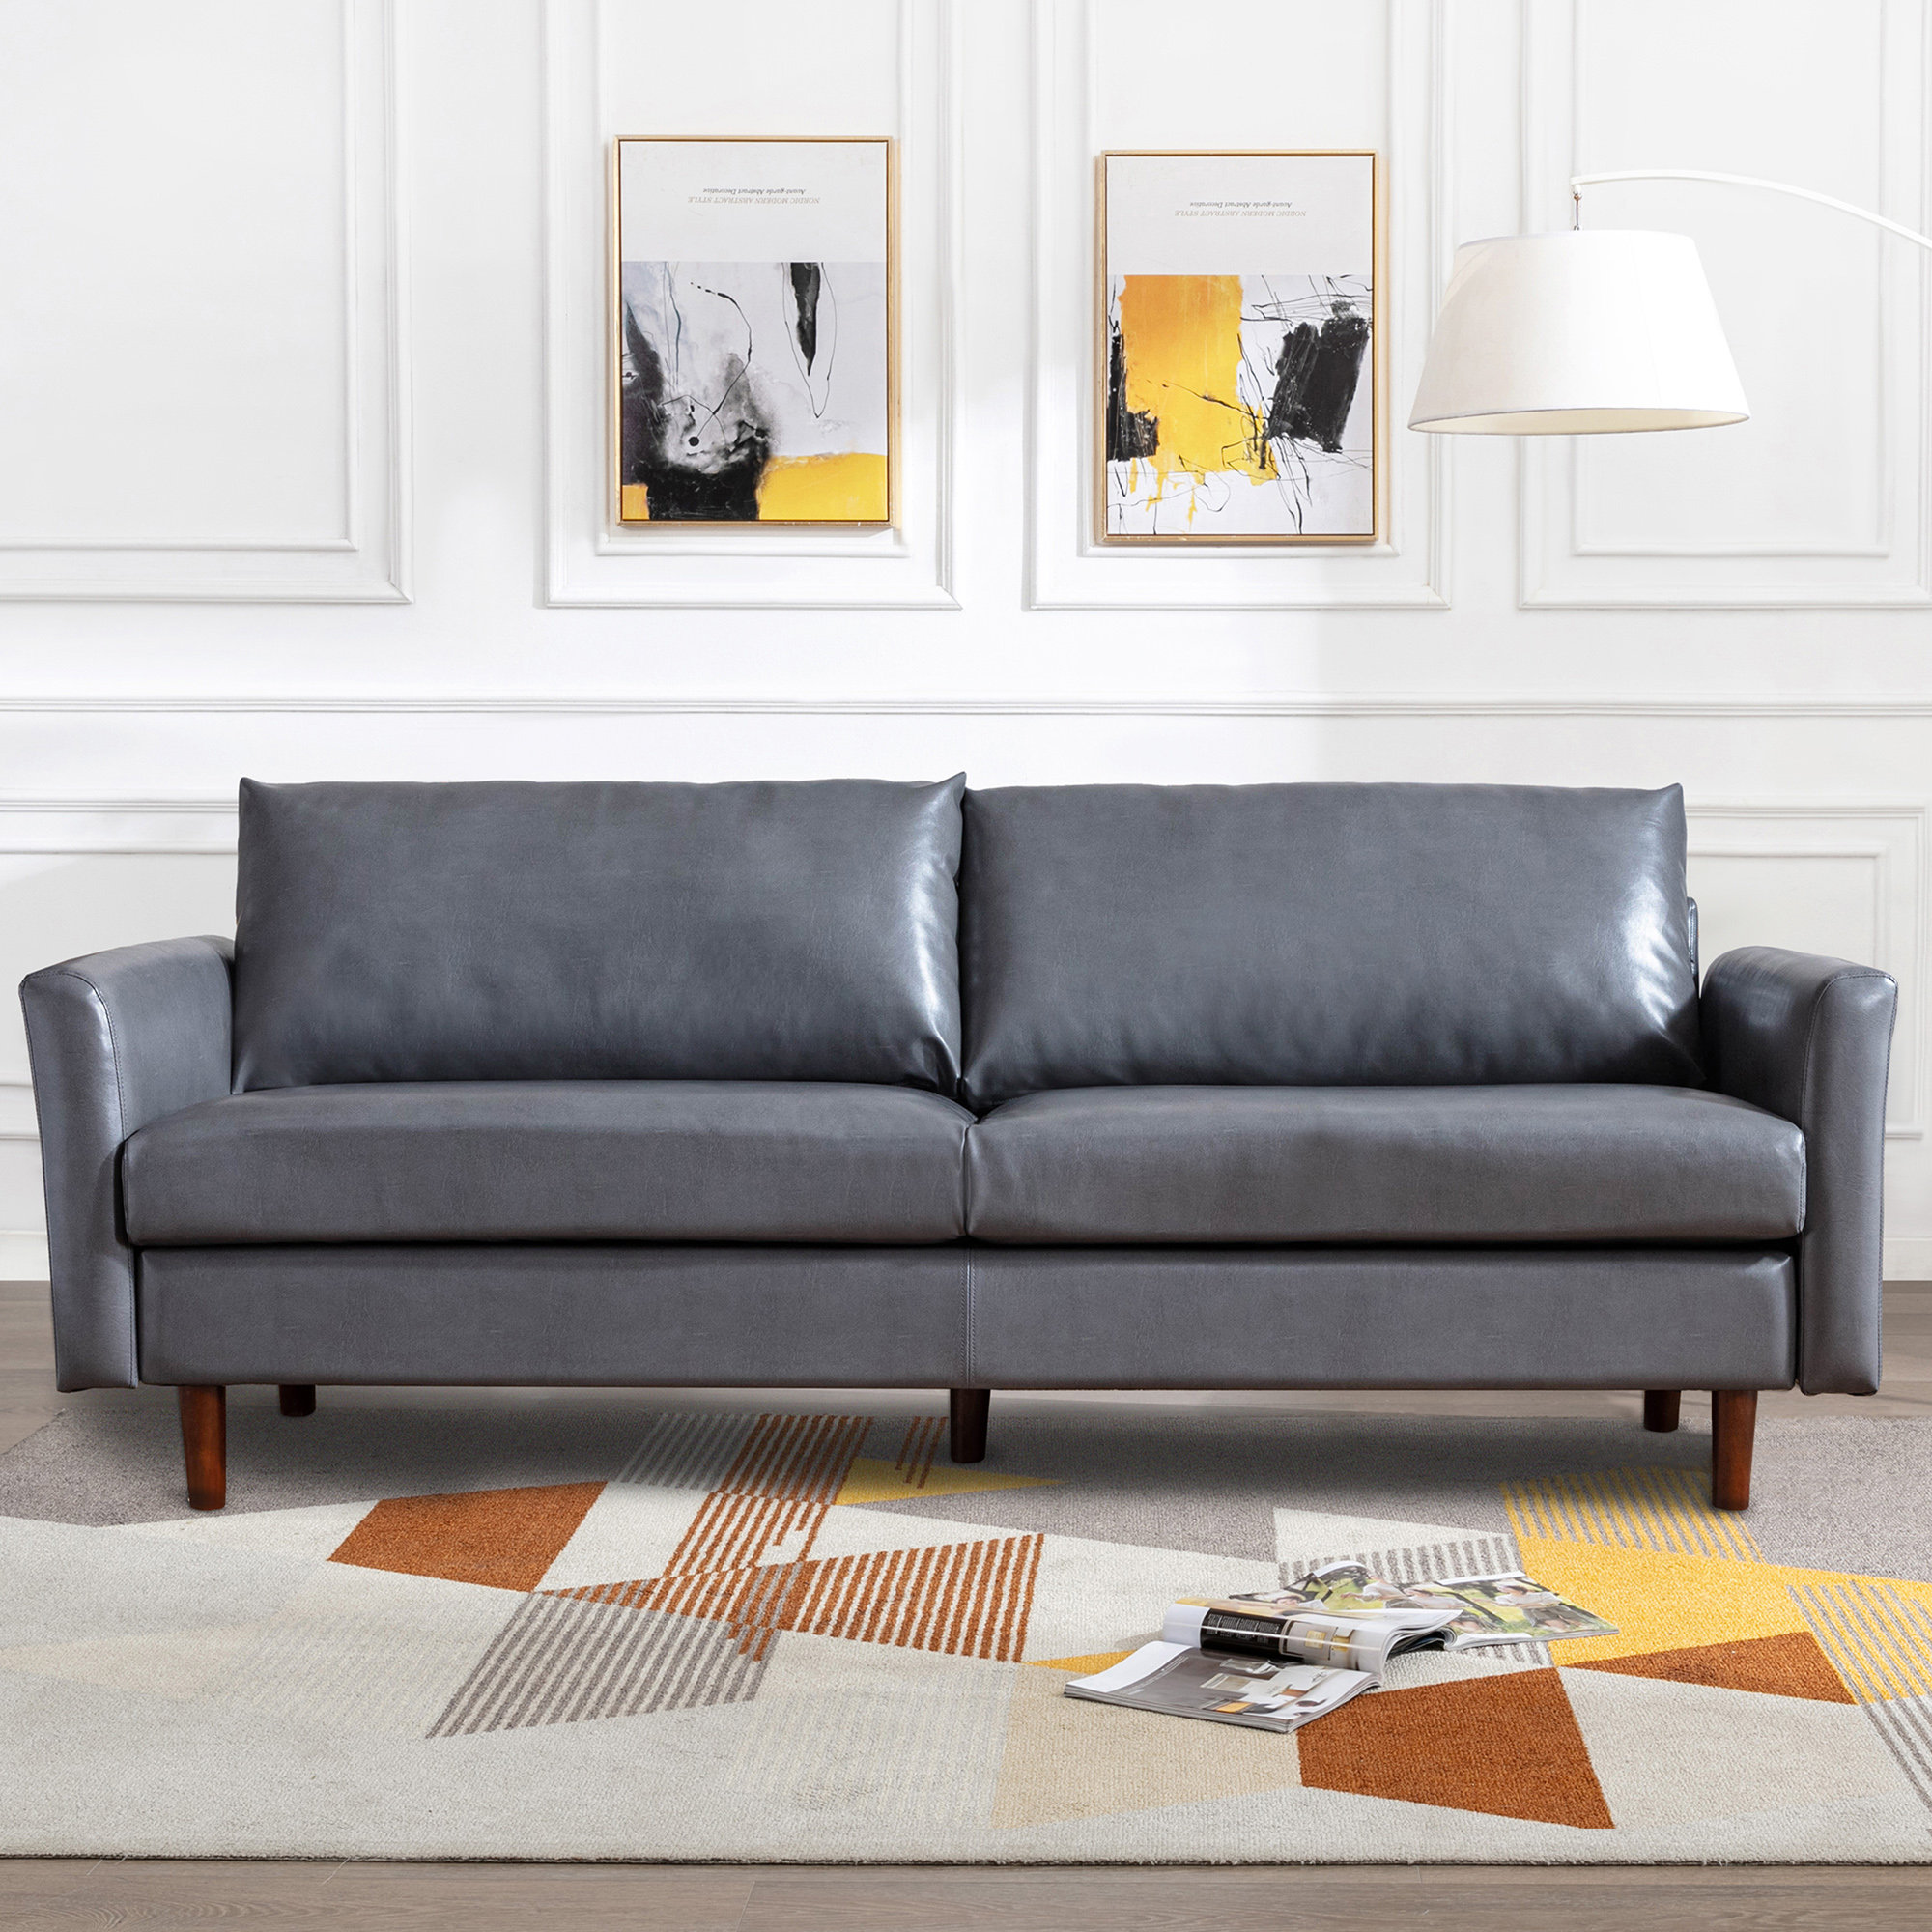 How to Choose the Perfect Rug Color for Your Living Room - Hana's Happy Home